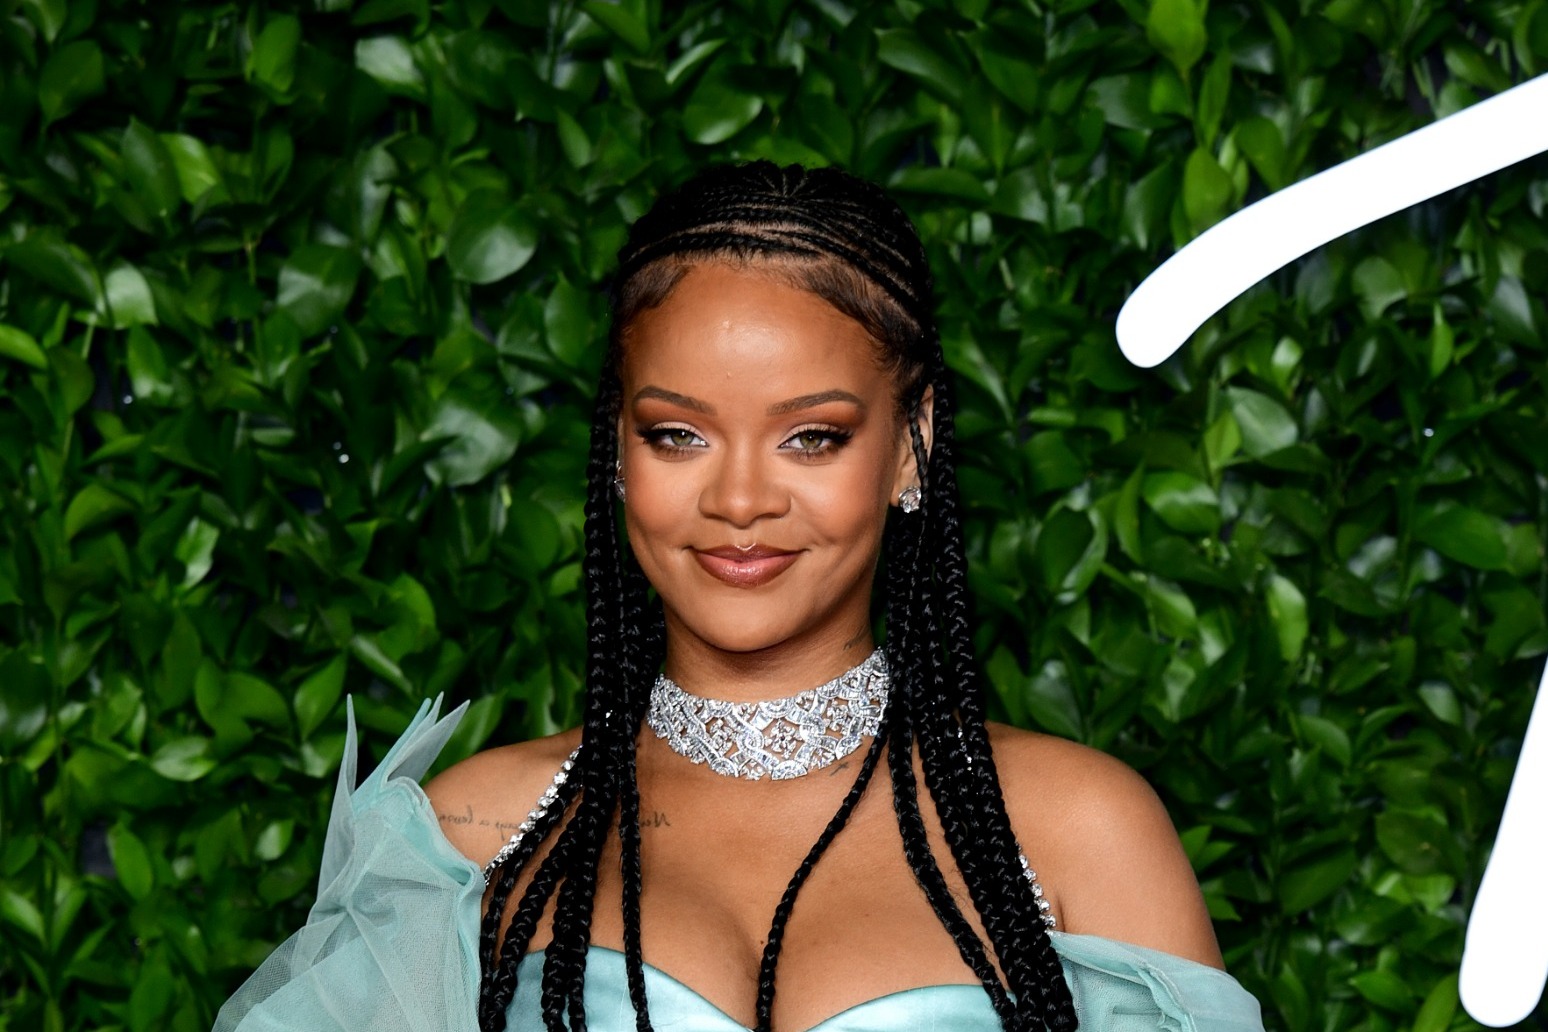 Rihanna ‘nervous, but excited’ to perform at the 2023 Super Bowl halftime show 